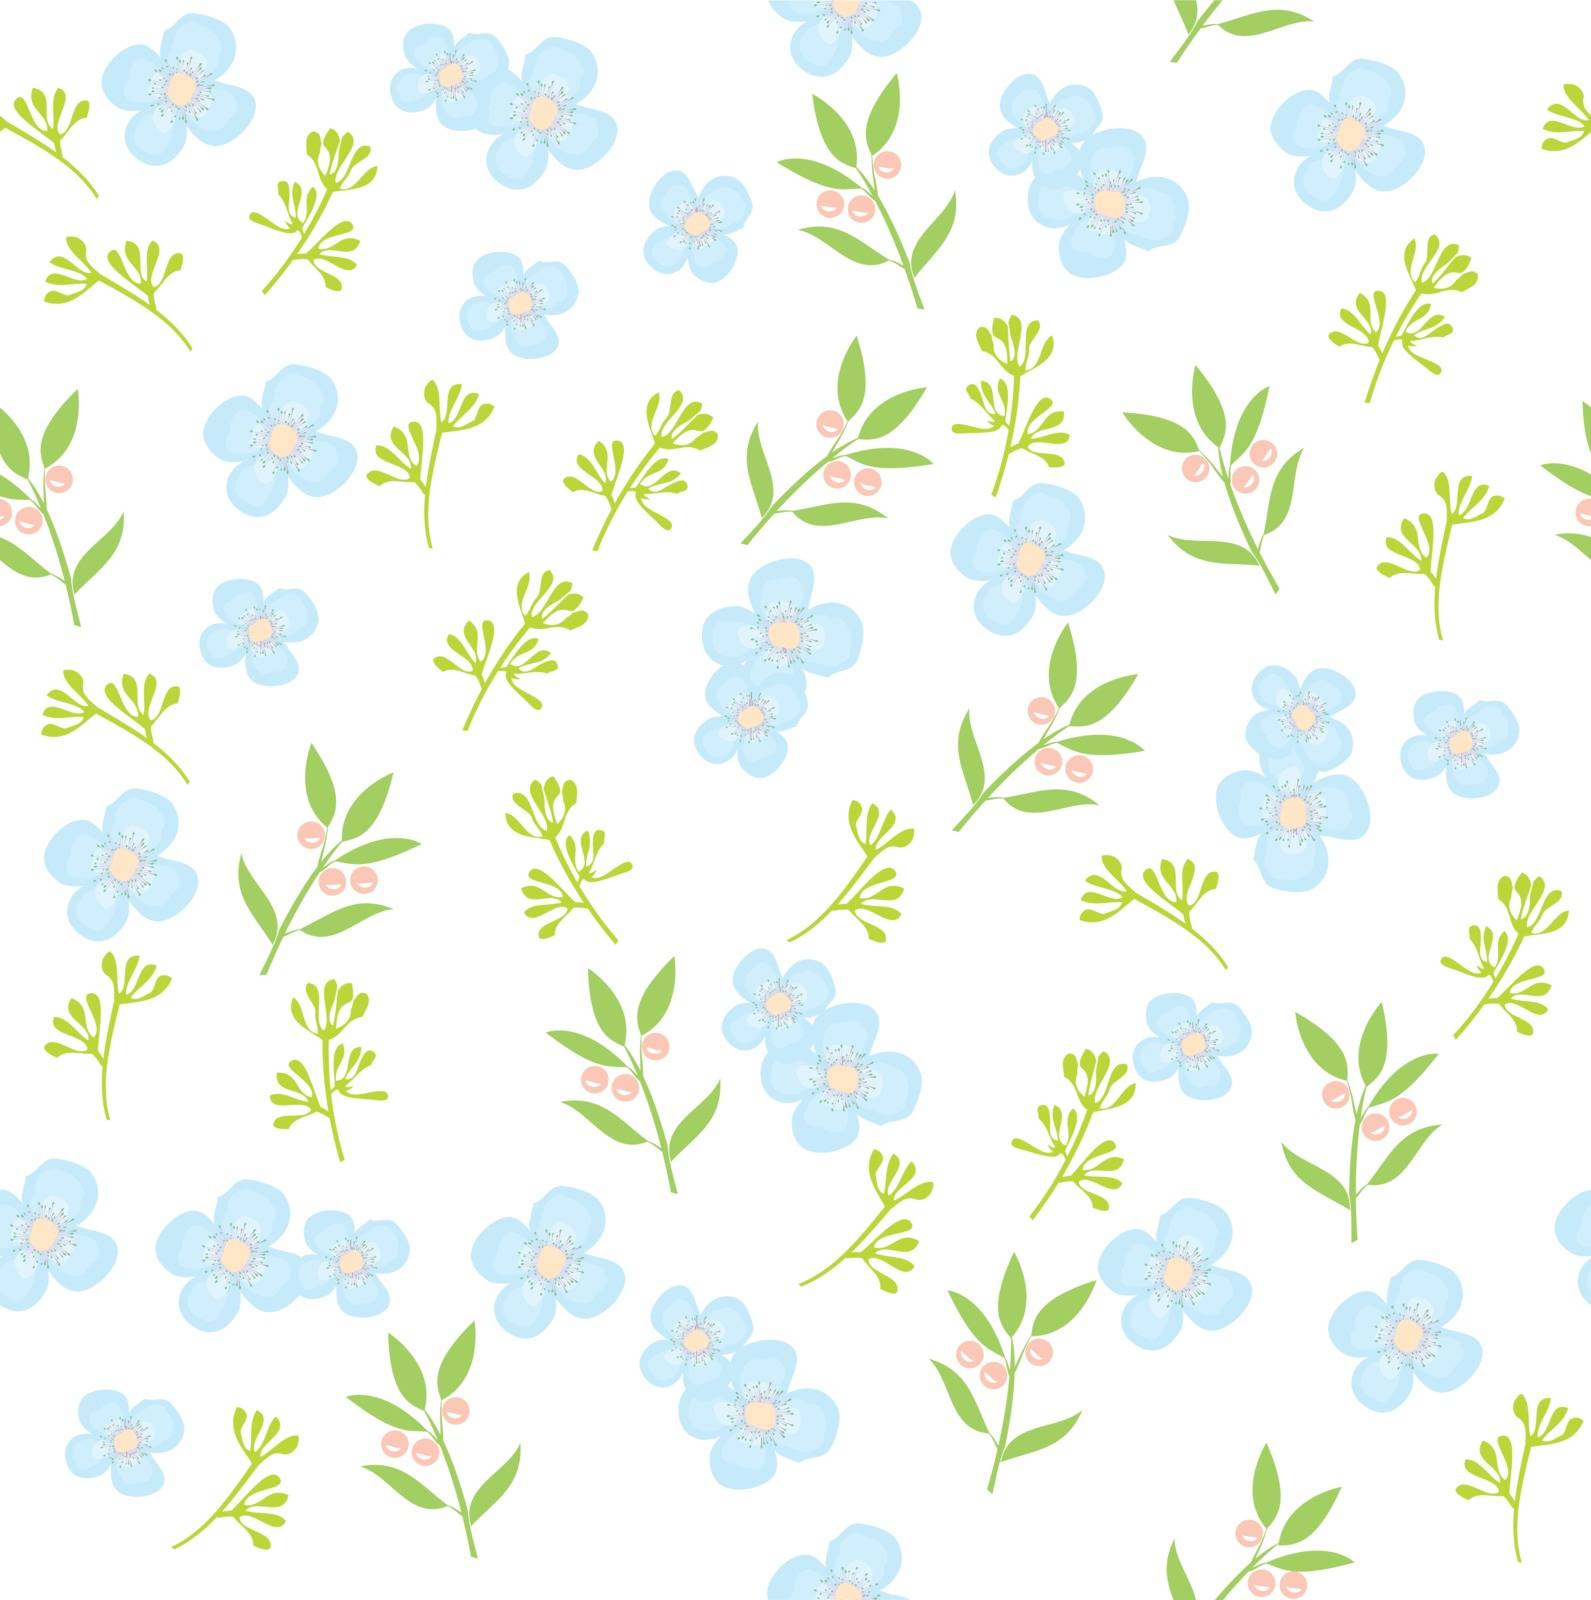 vector illustration of floral background seamless